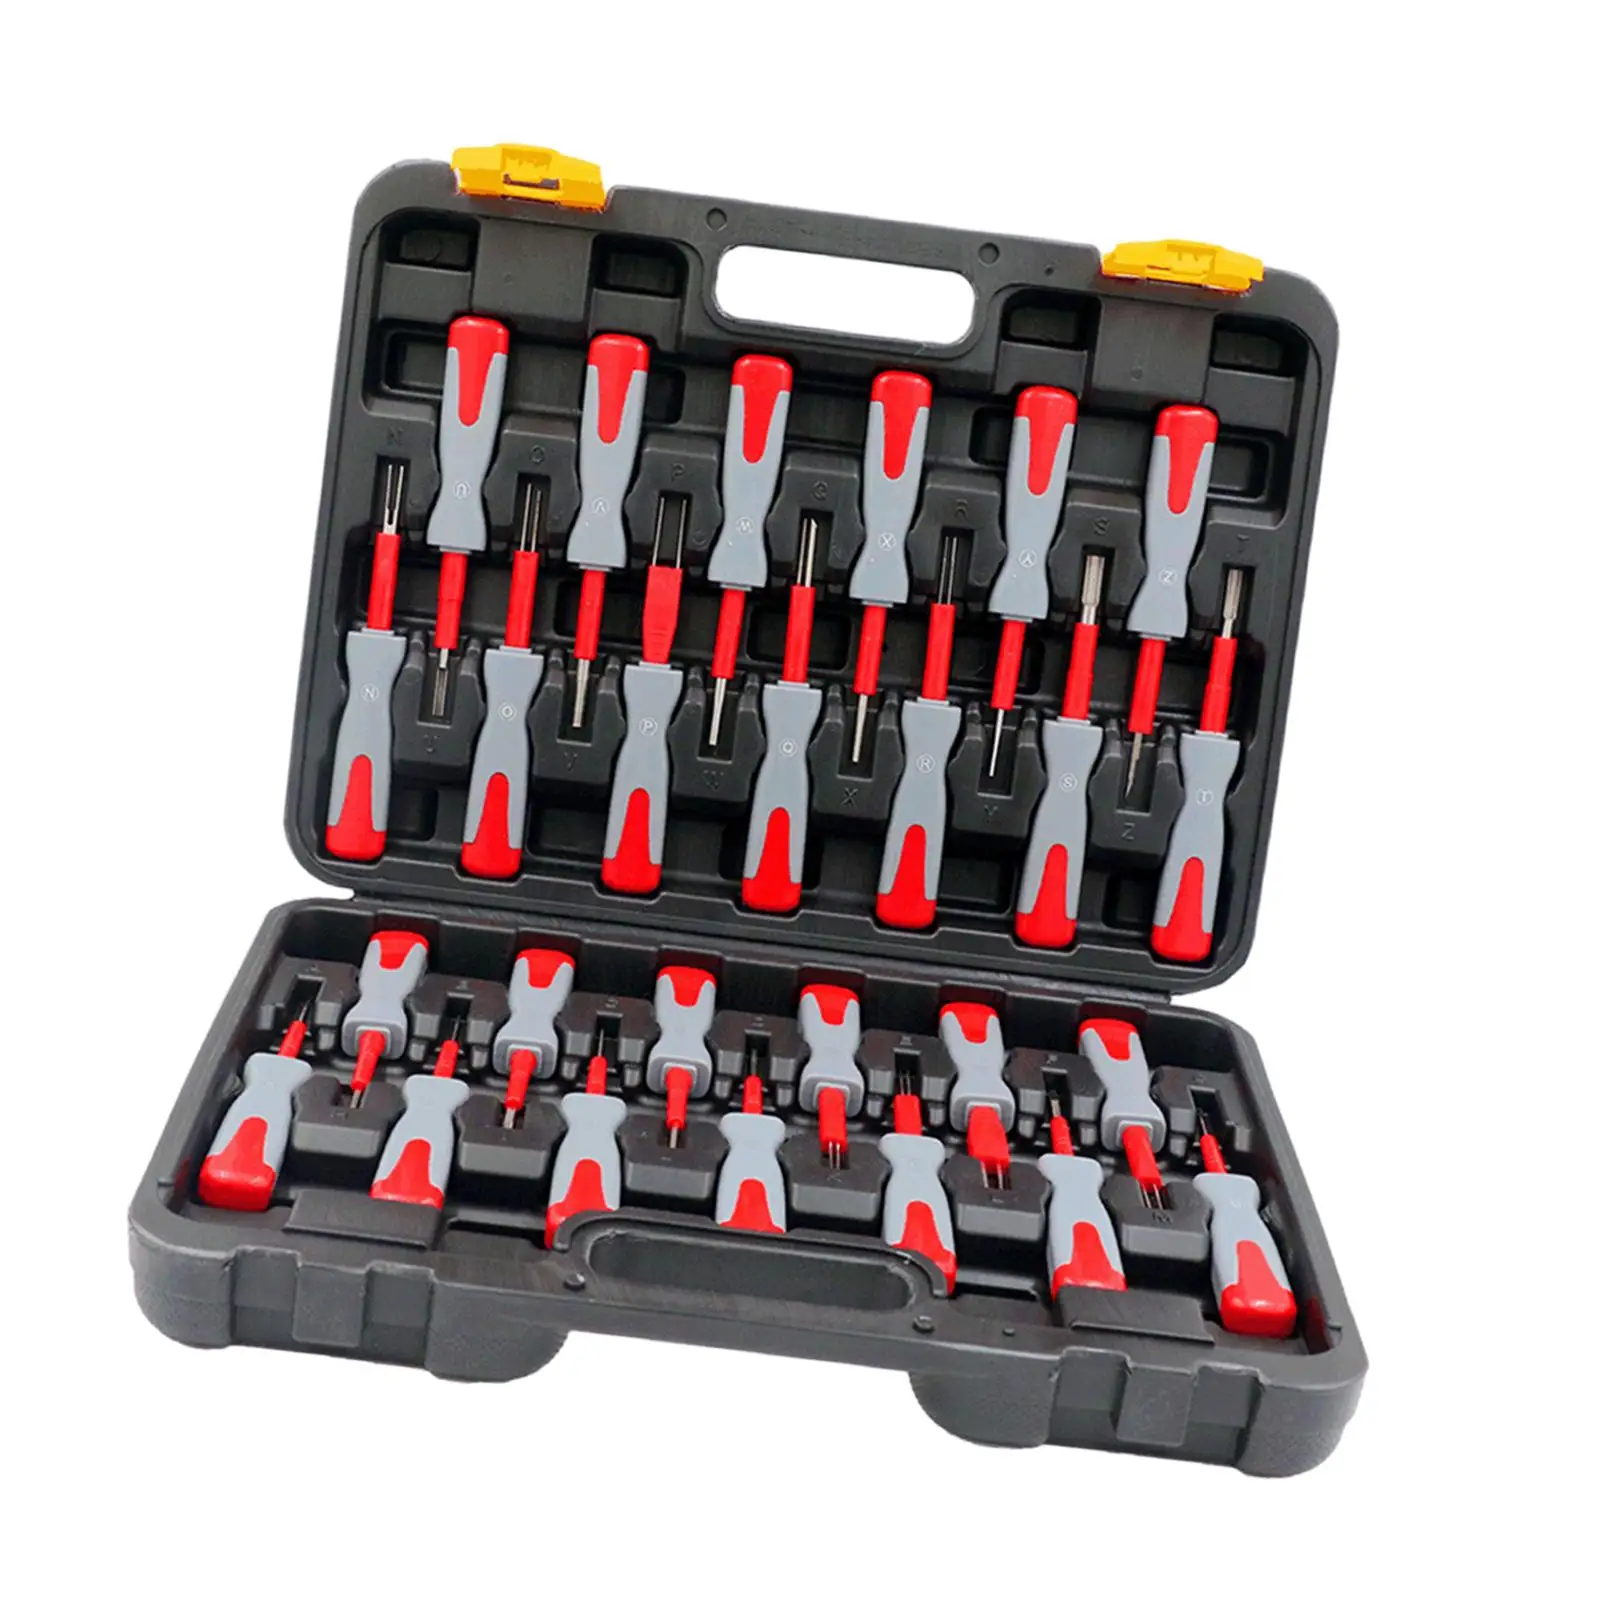 26Pcs Car Terminal Removal Tool Kit Extractor Universal with Carrying Case